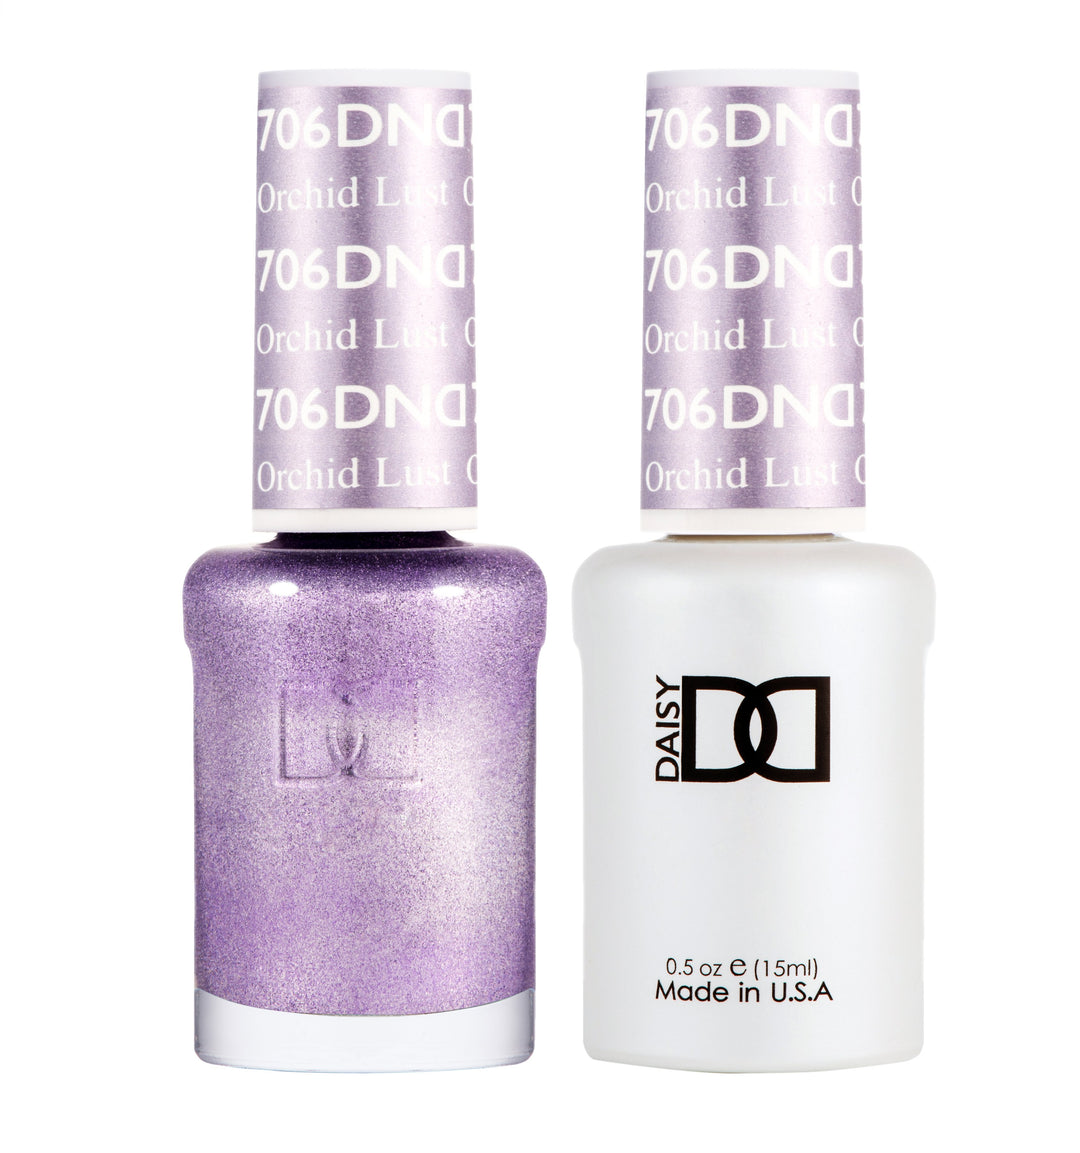 DND DUO Nail Lacquer and UV|LED Gel Polish Orchid Lust 706 (2 x 15ml)